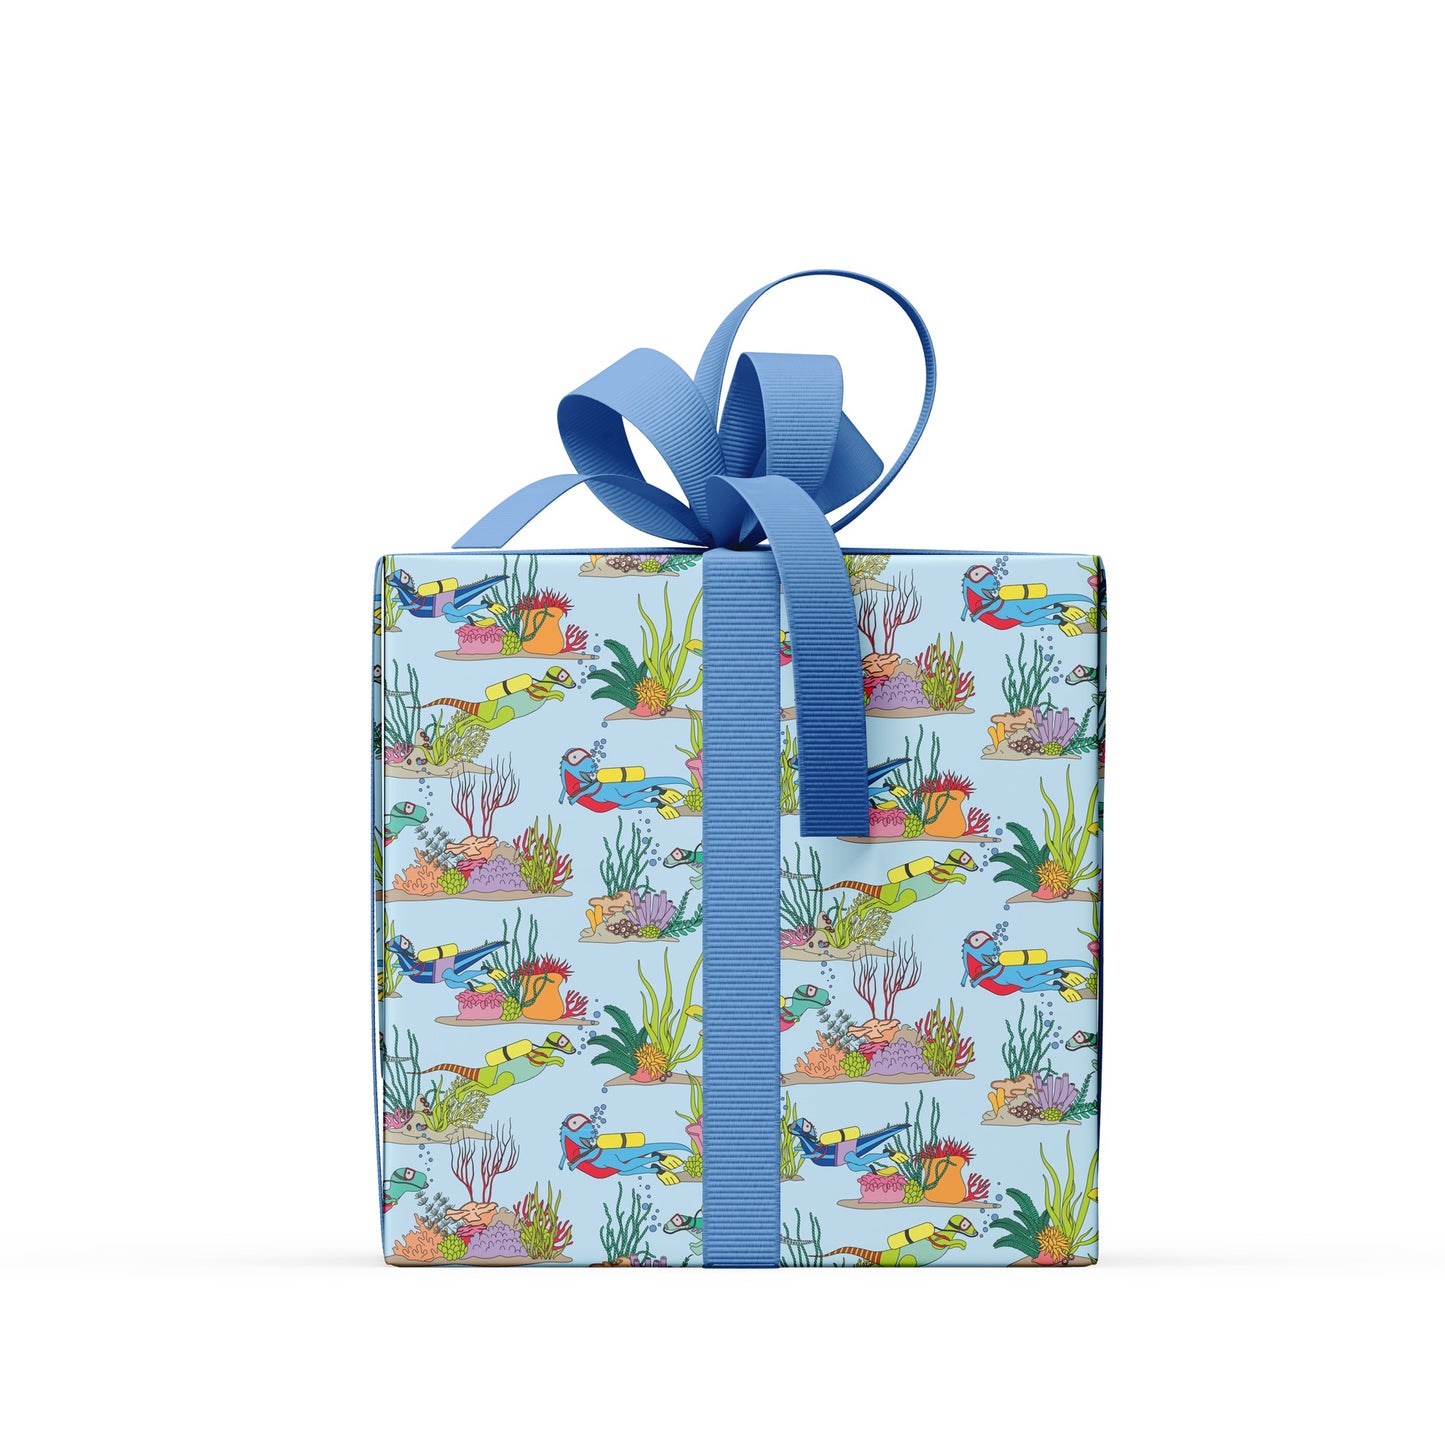 box covered in under the sea dinosaur wrapping paper with a blue bow